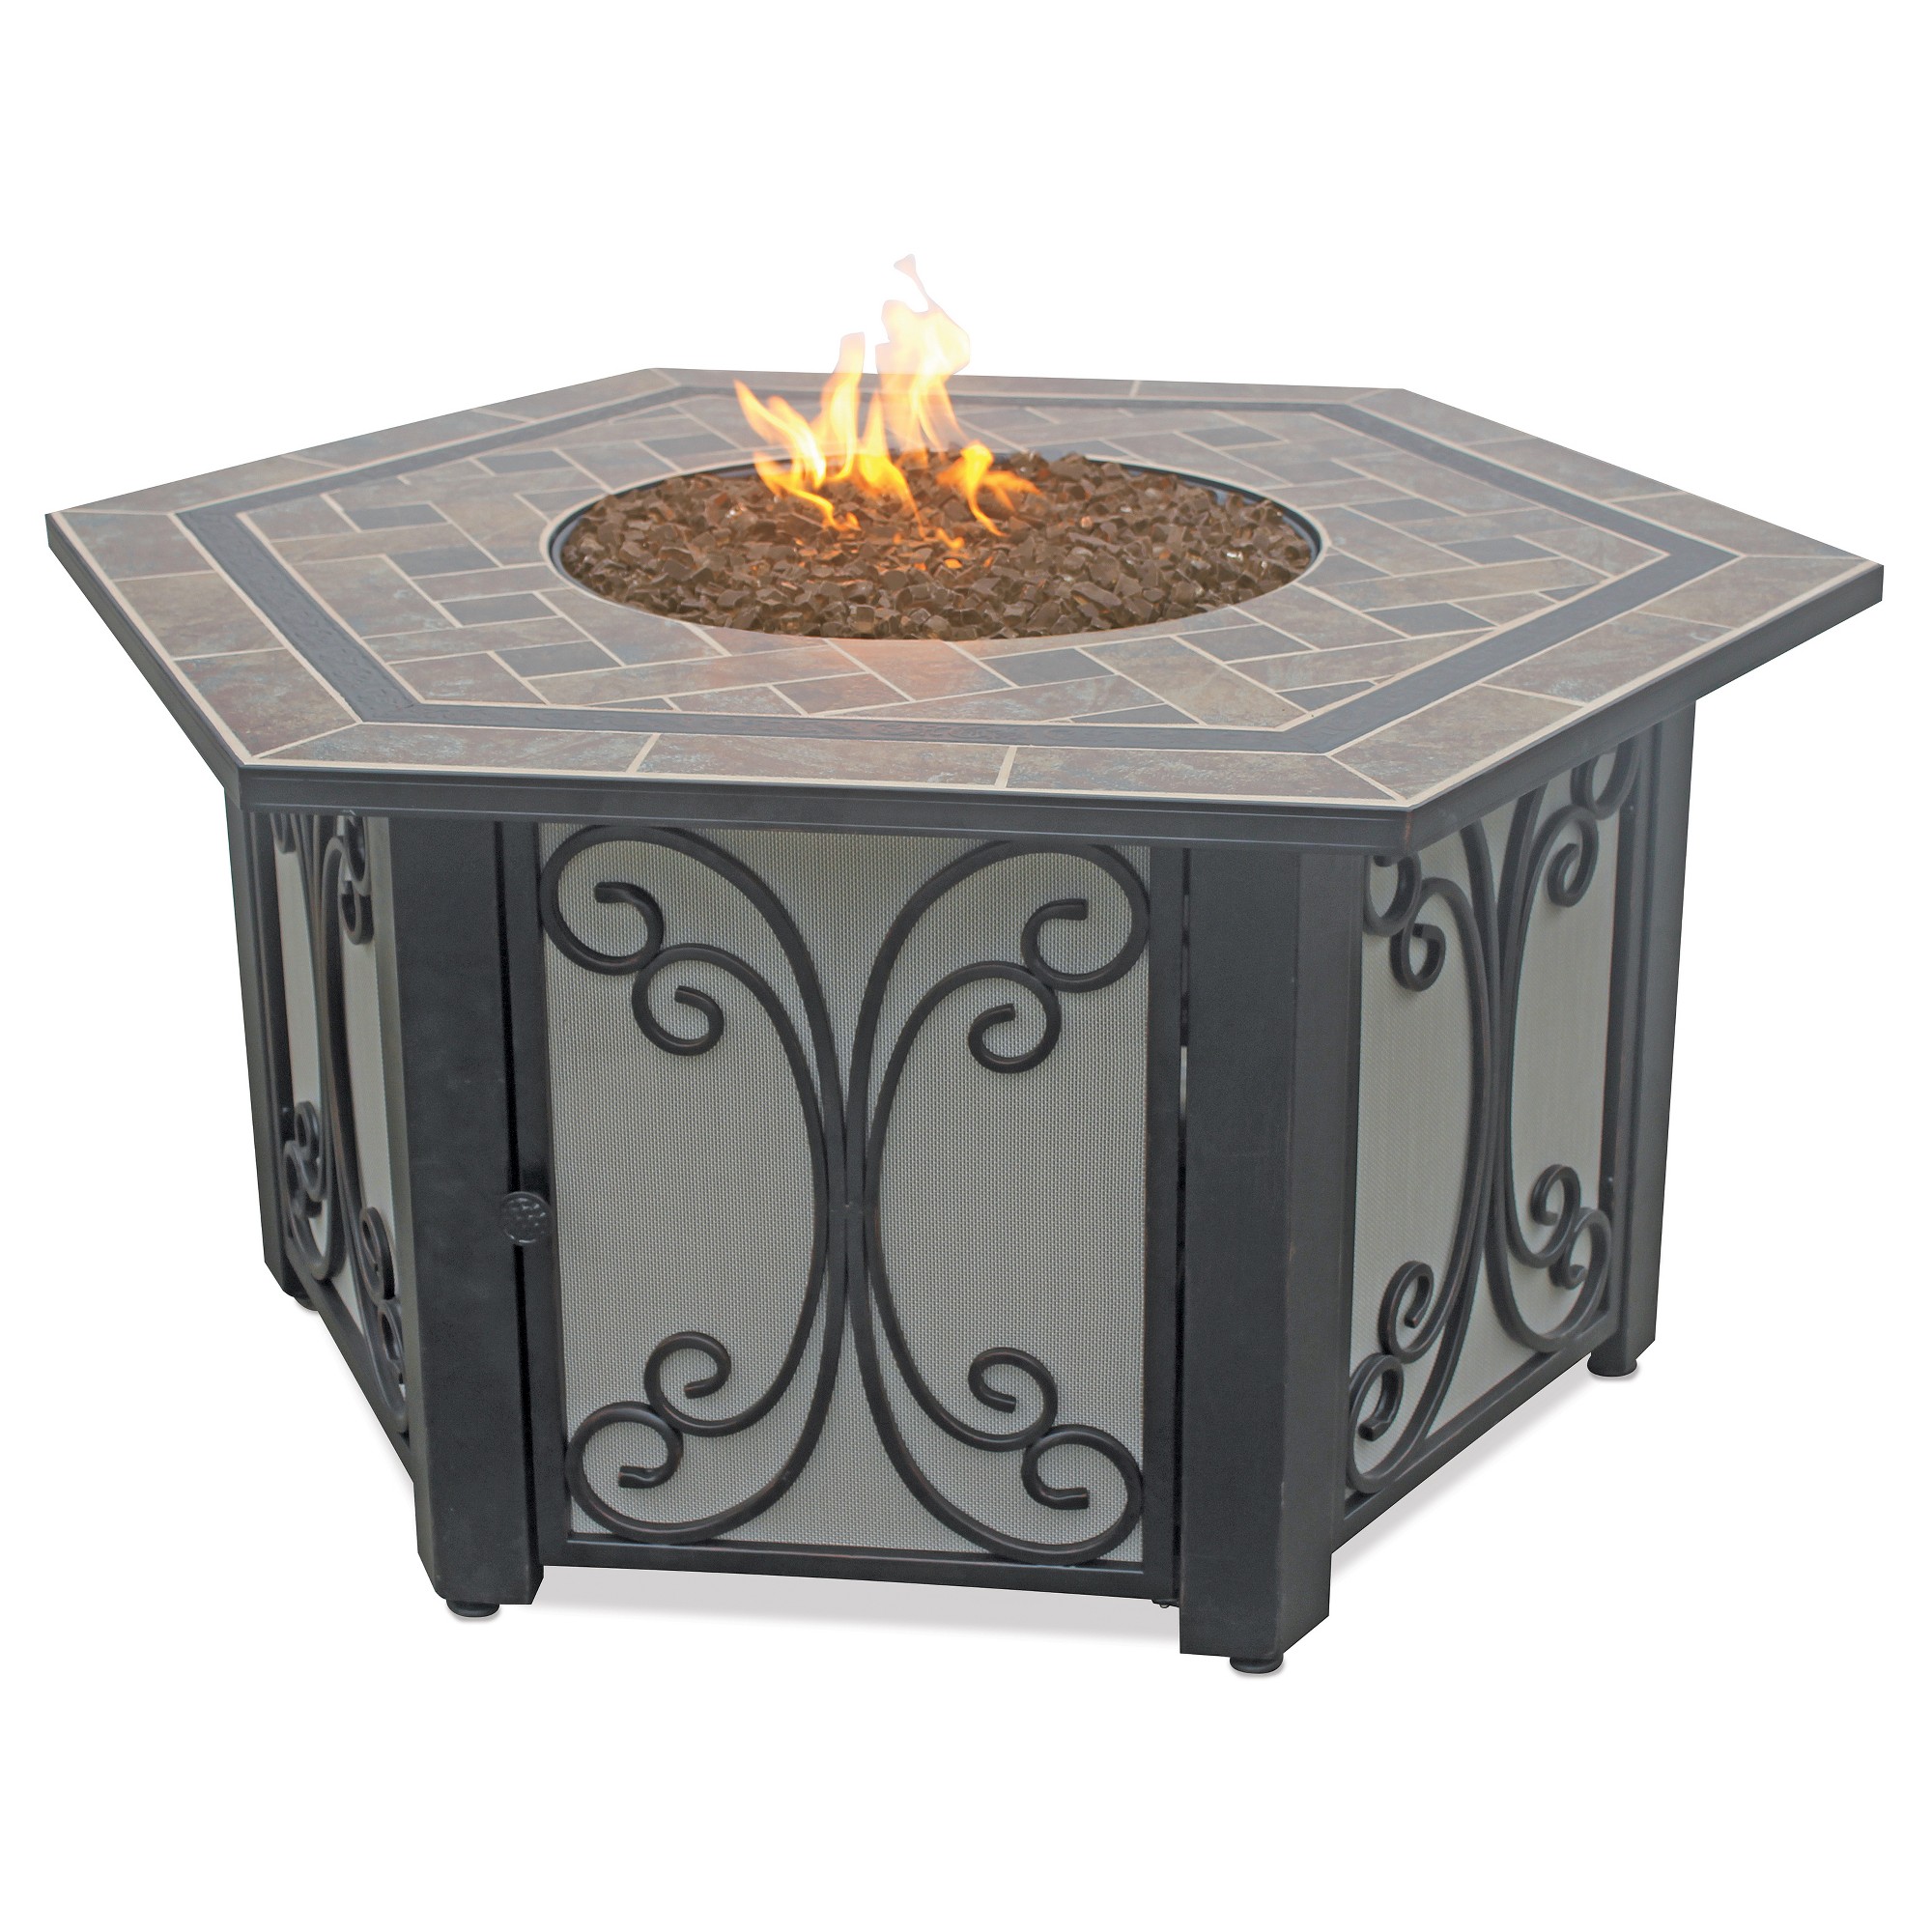 Endless Summer Outdoor Fireplace Unique 48 Gas Outdoor Firepit Slate Grey Endless Summer